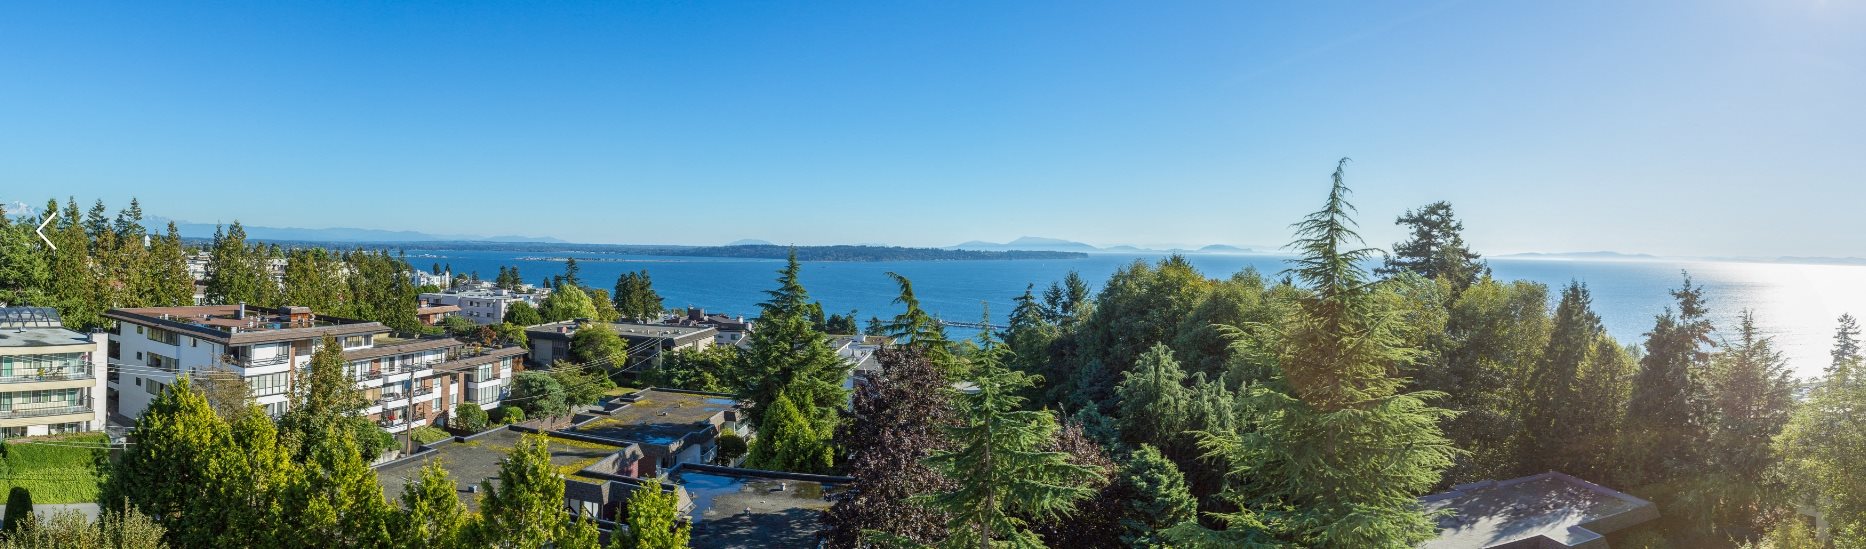 Bayview Gardens Apartments In White Rock Bc